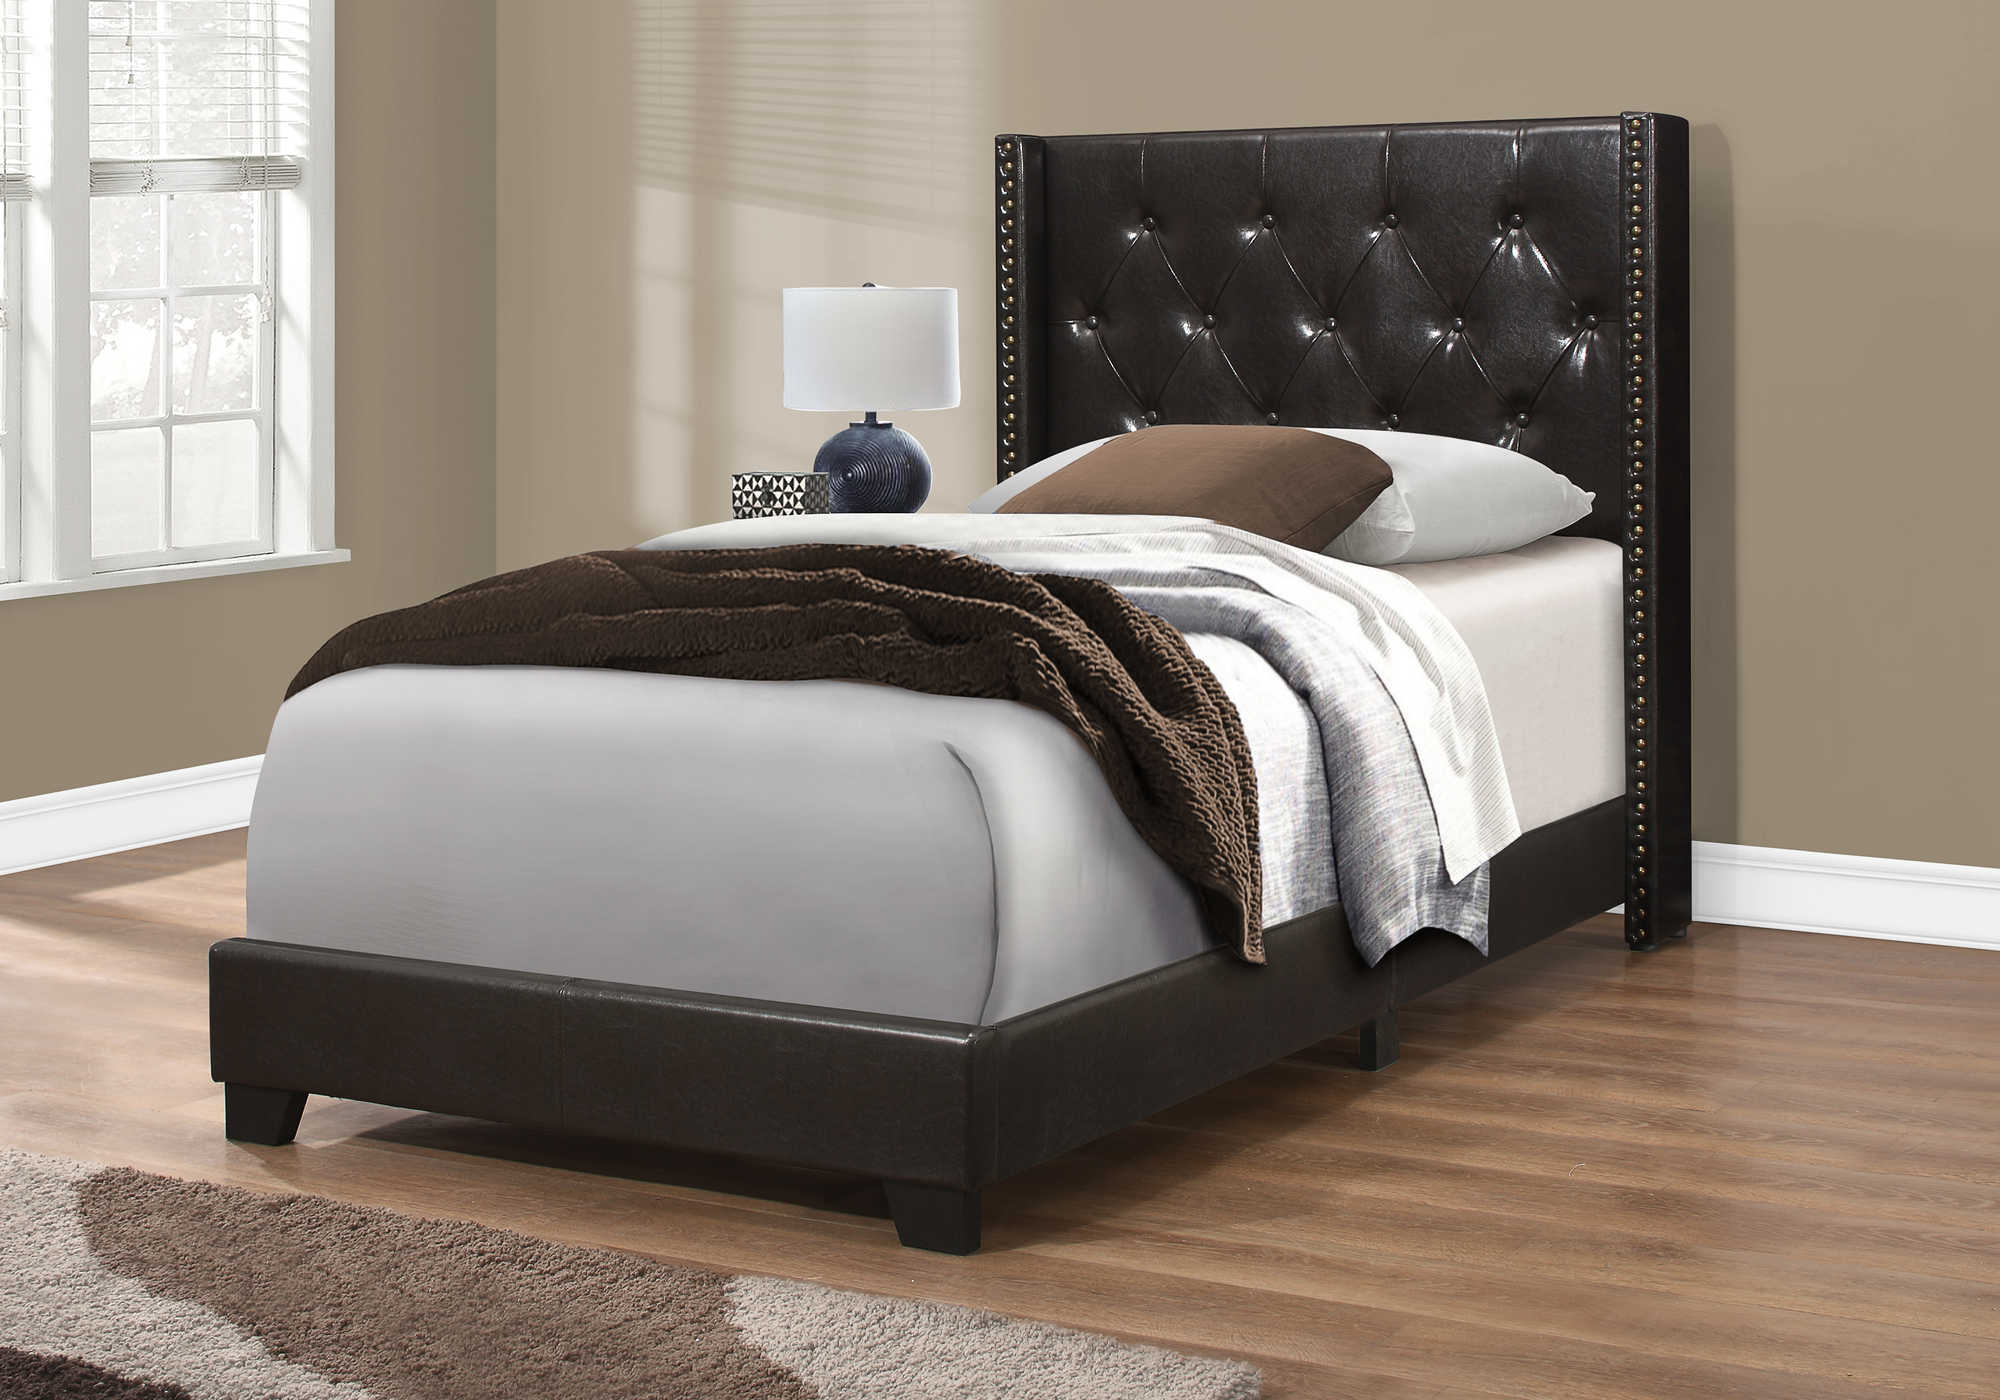 BED - TWIN SIZE / BROWN LEATHER-LOOK WITH BRASS TRIM